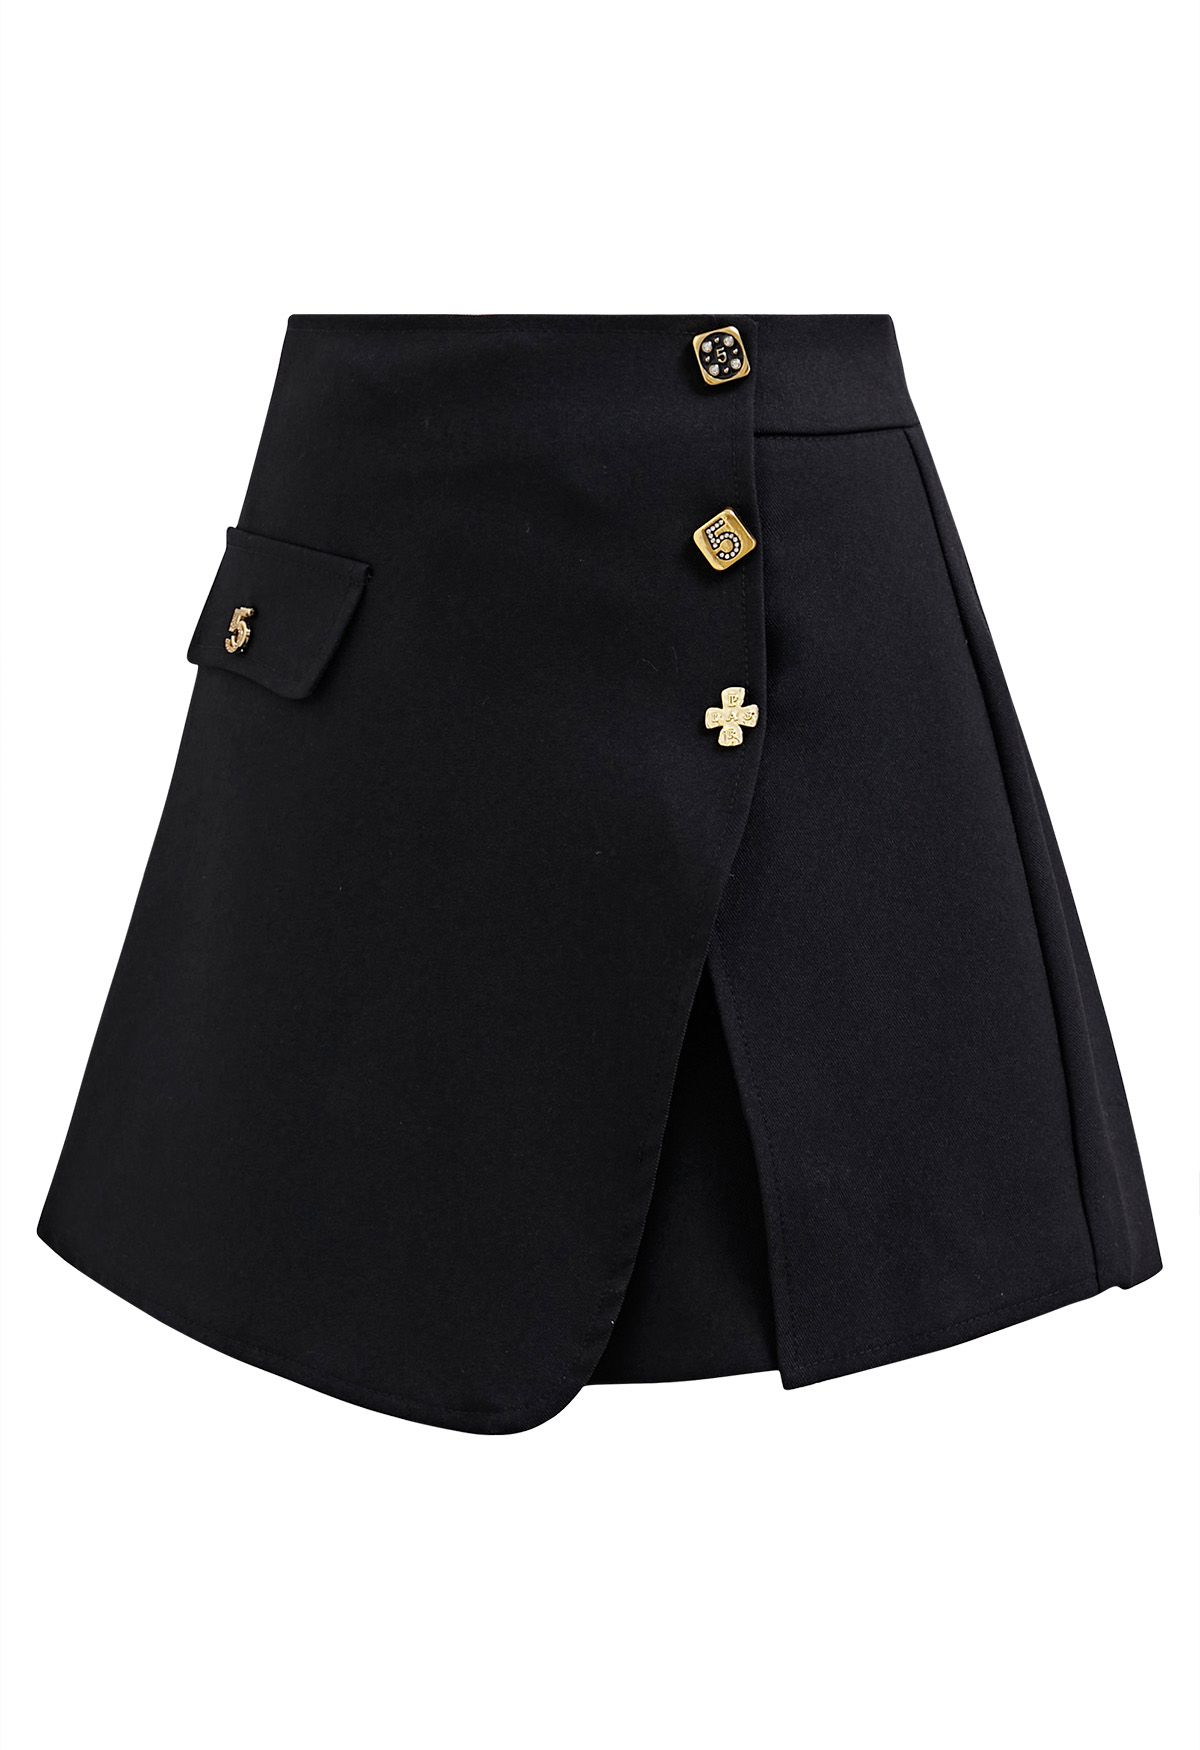 Decorative Buttons Flap Skorts in Black